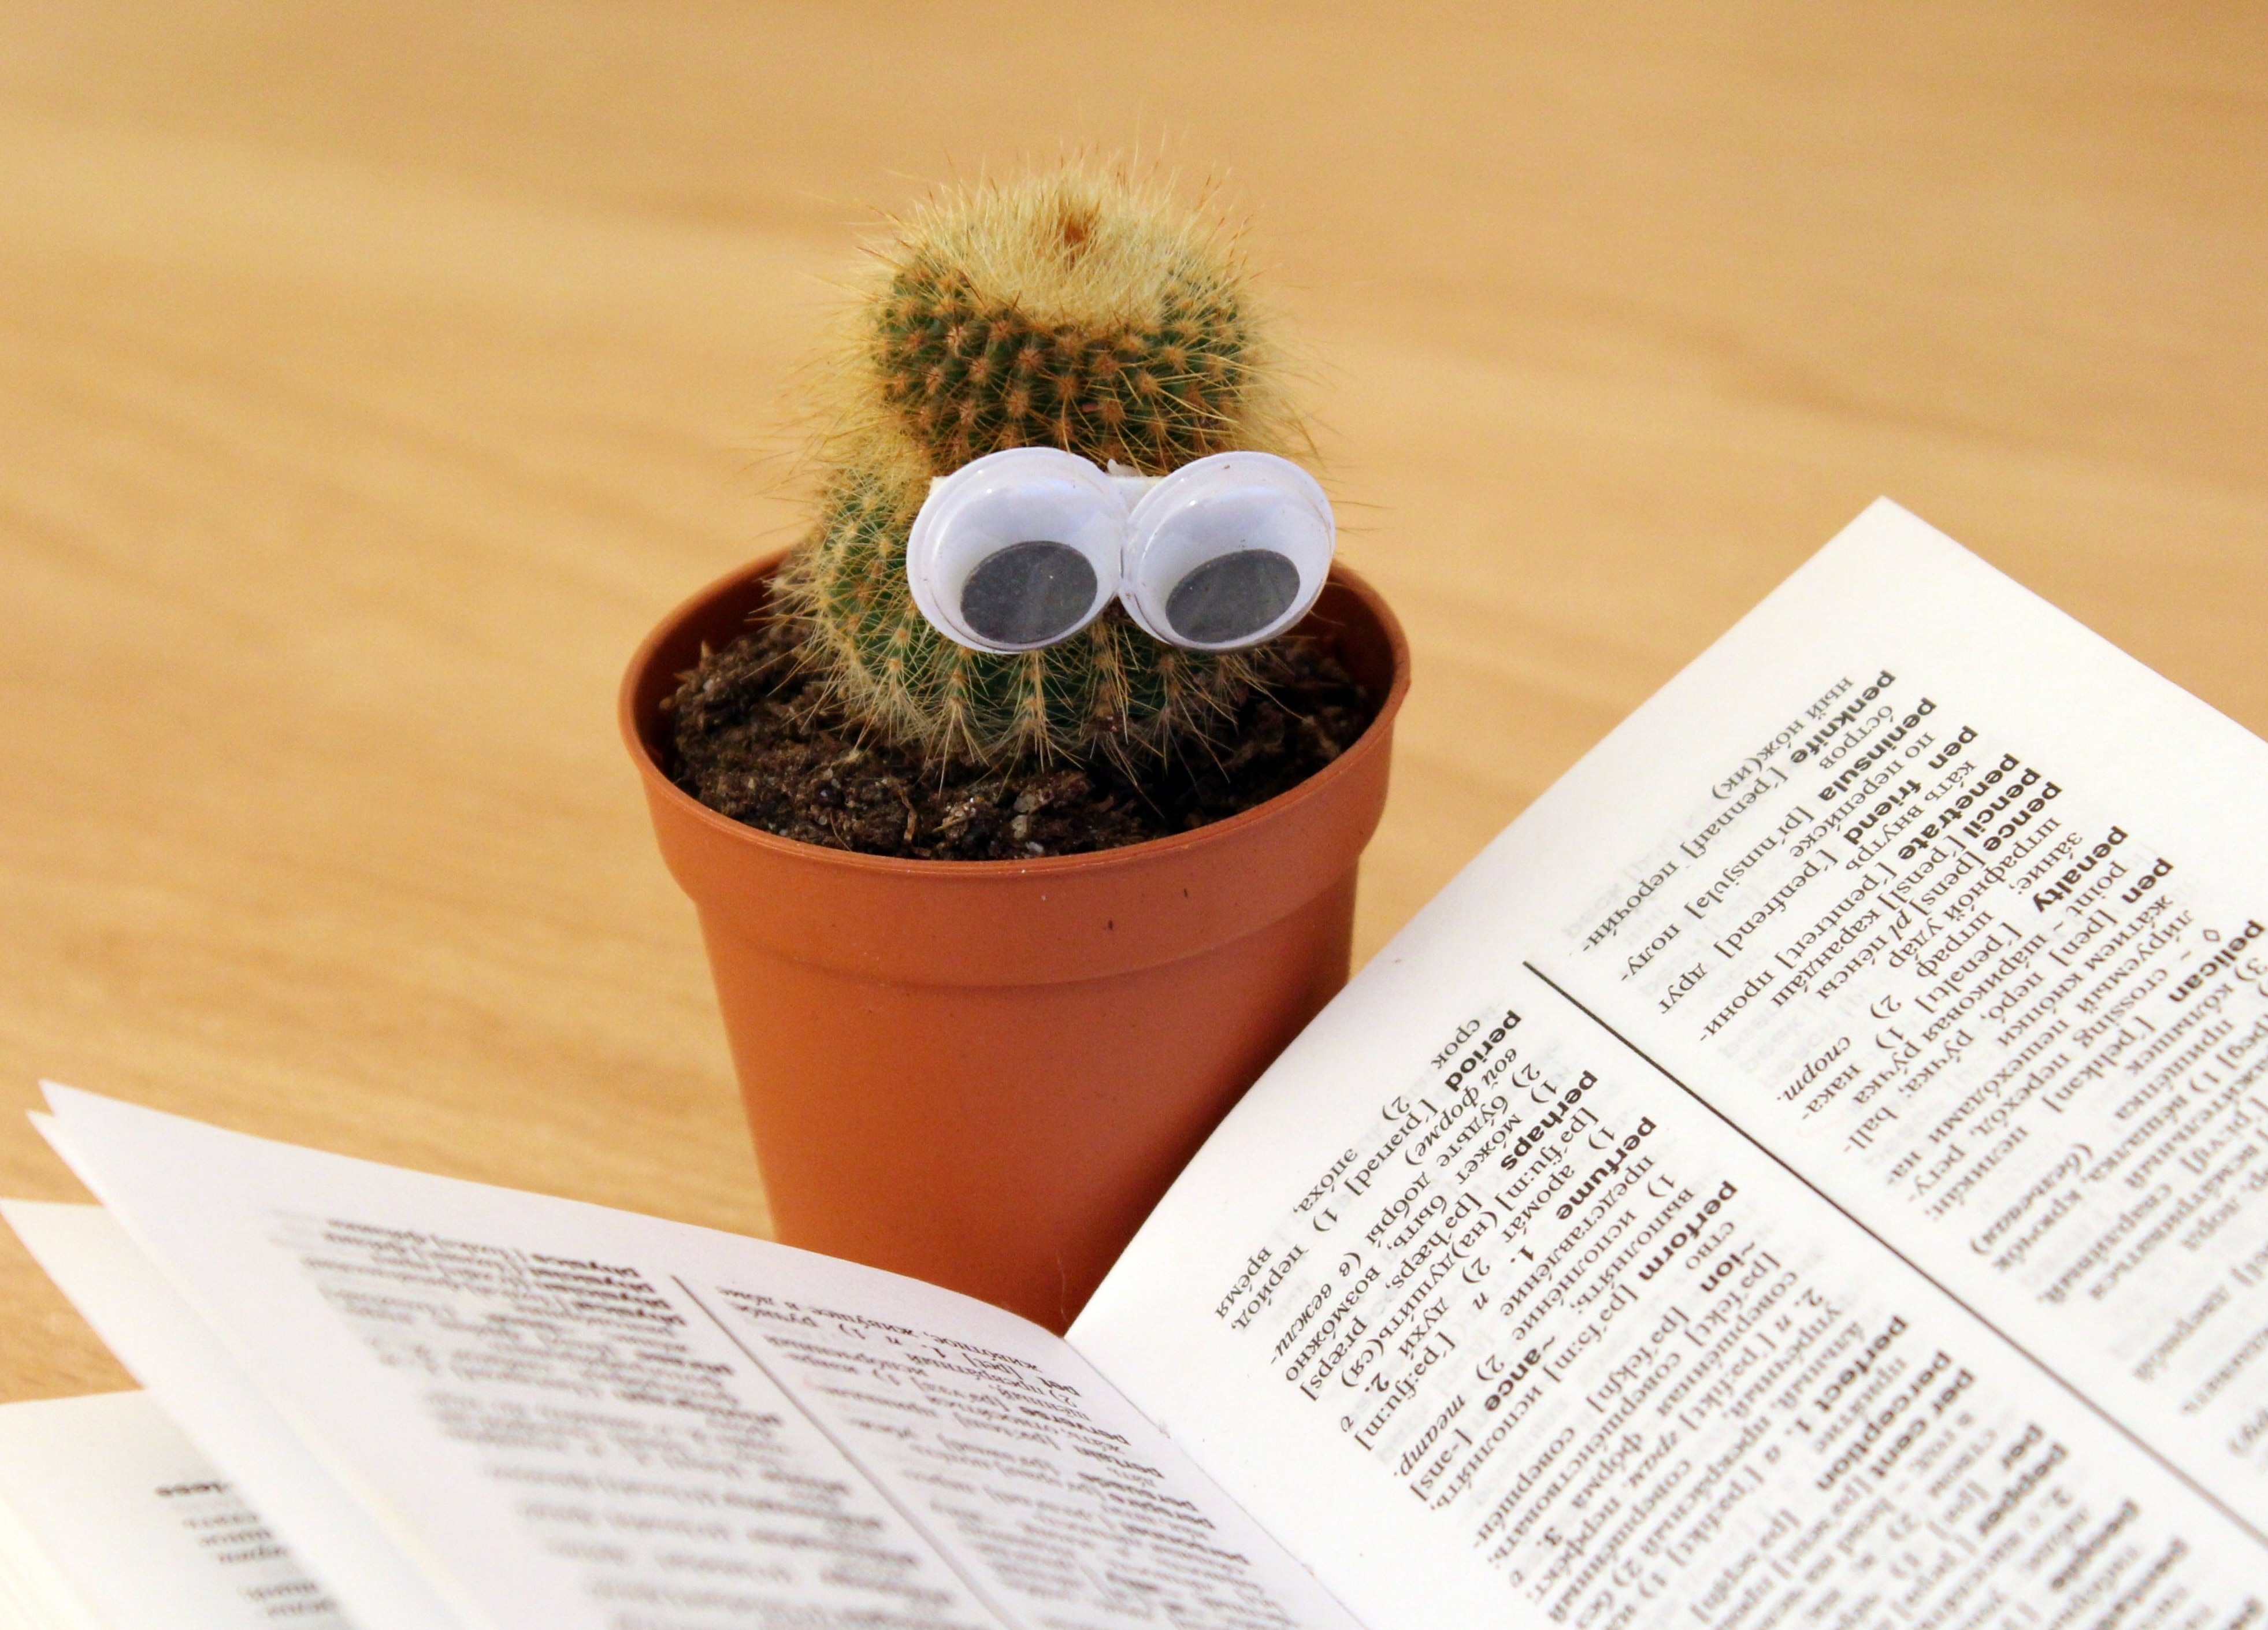 green potted cactus beside opened reference book on top of table